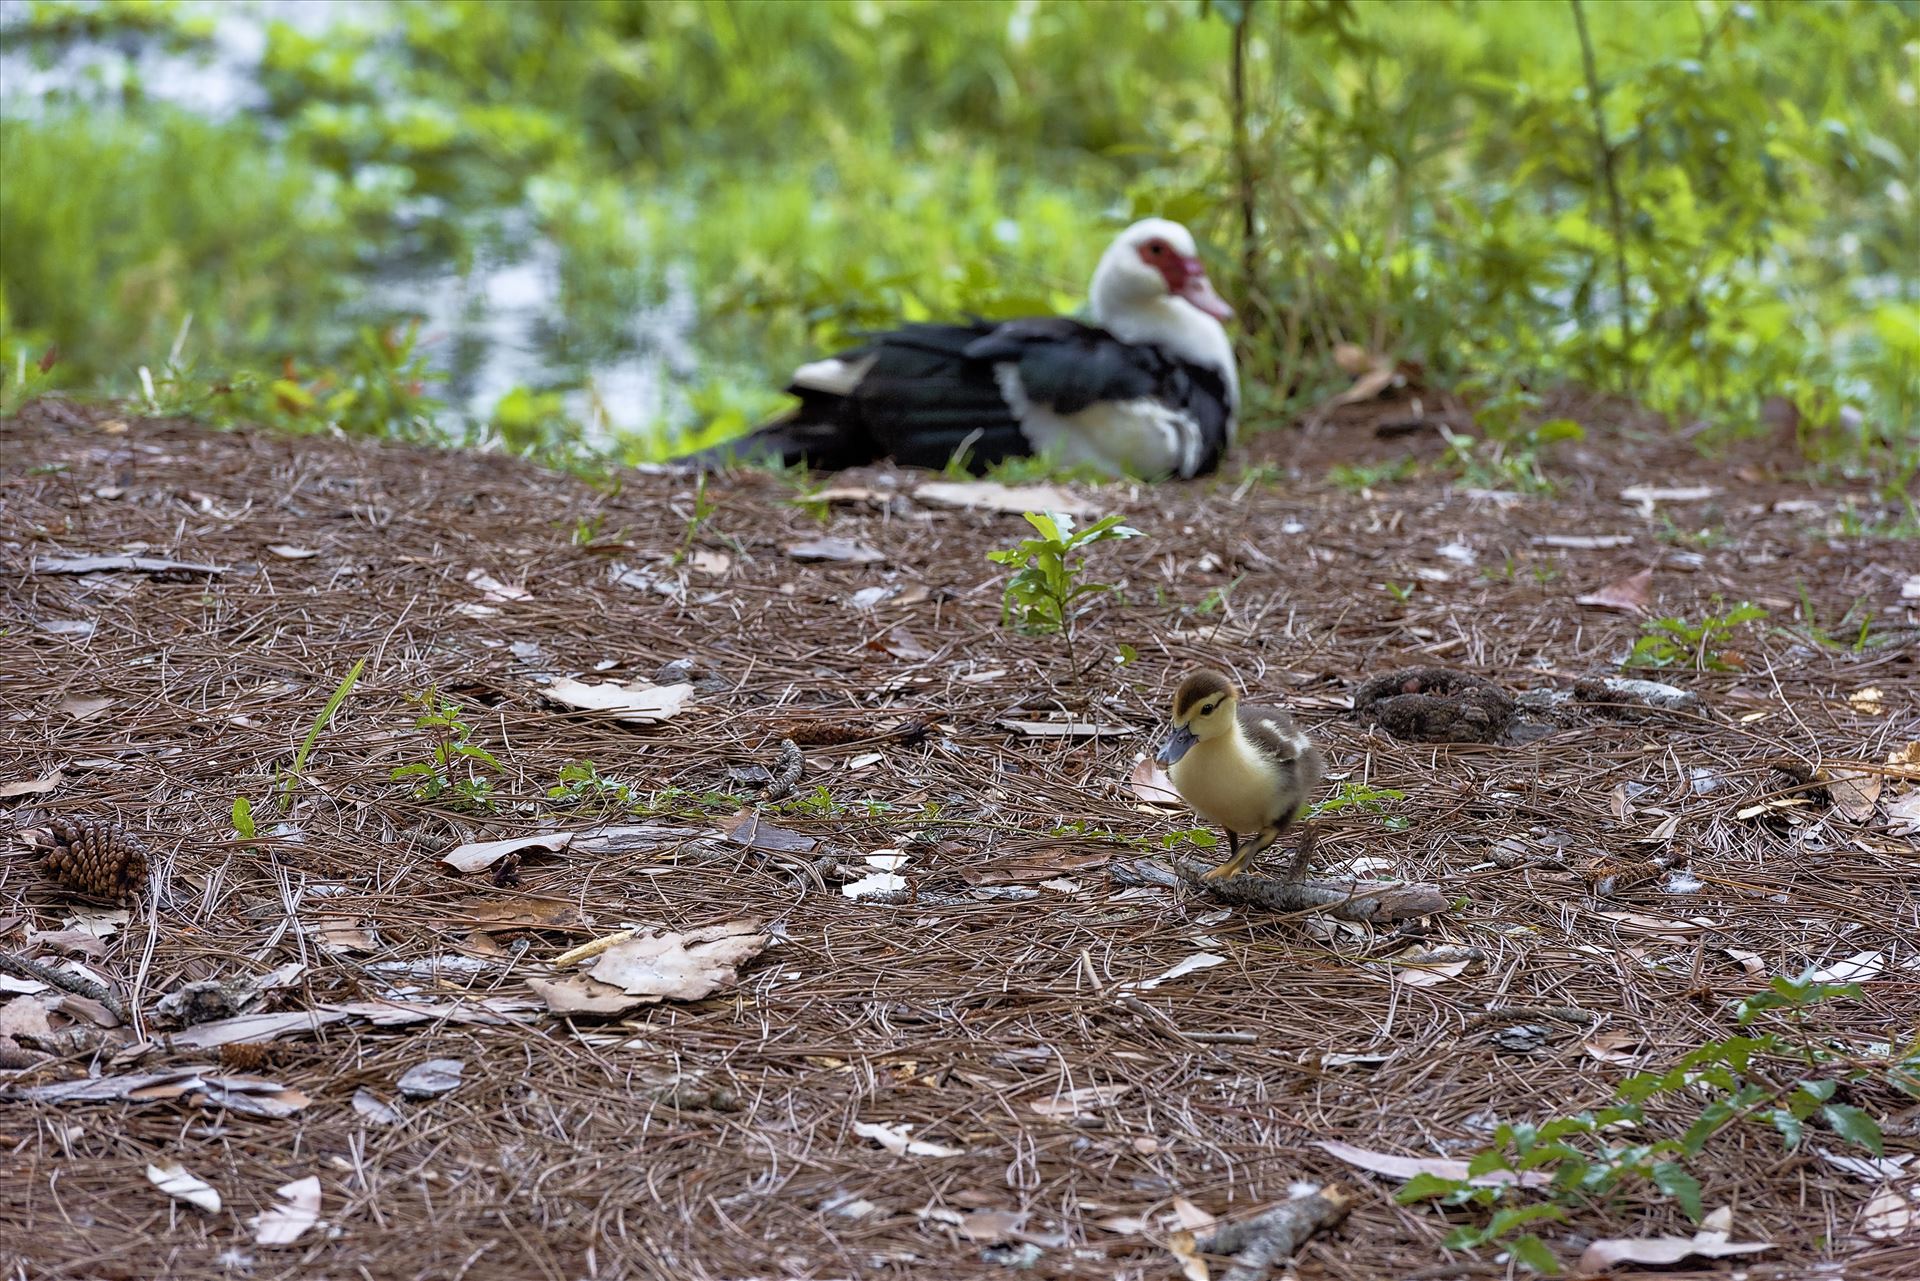 muscovy duckling Bokeh moma in the background sssf 8108848.jpg muscovy duckling and moma by Terry Kelly Photography